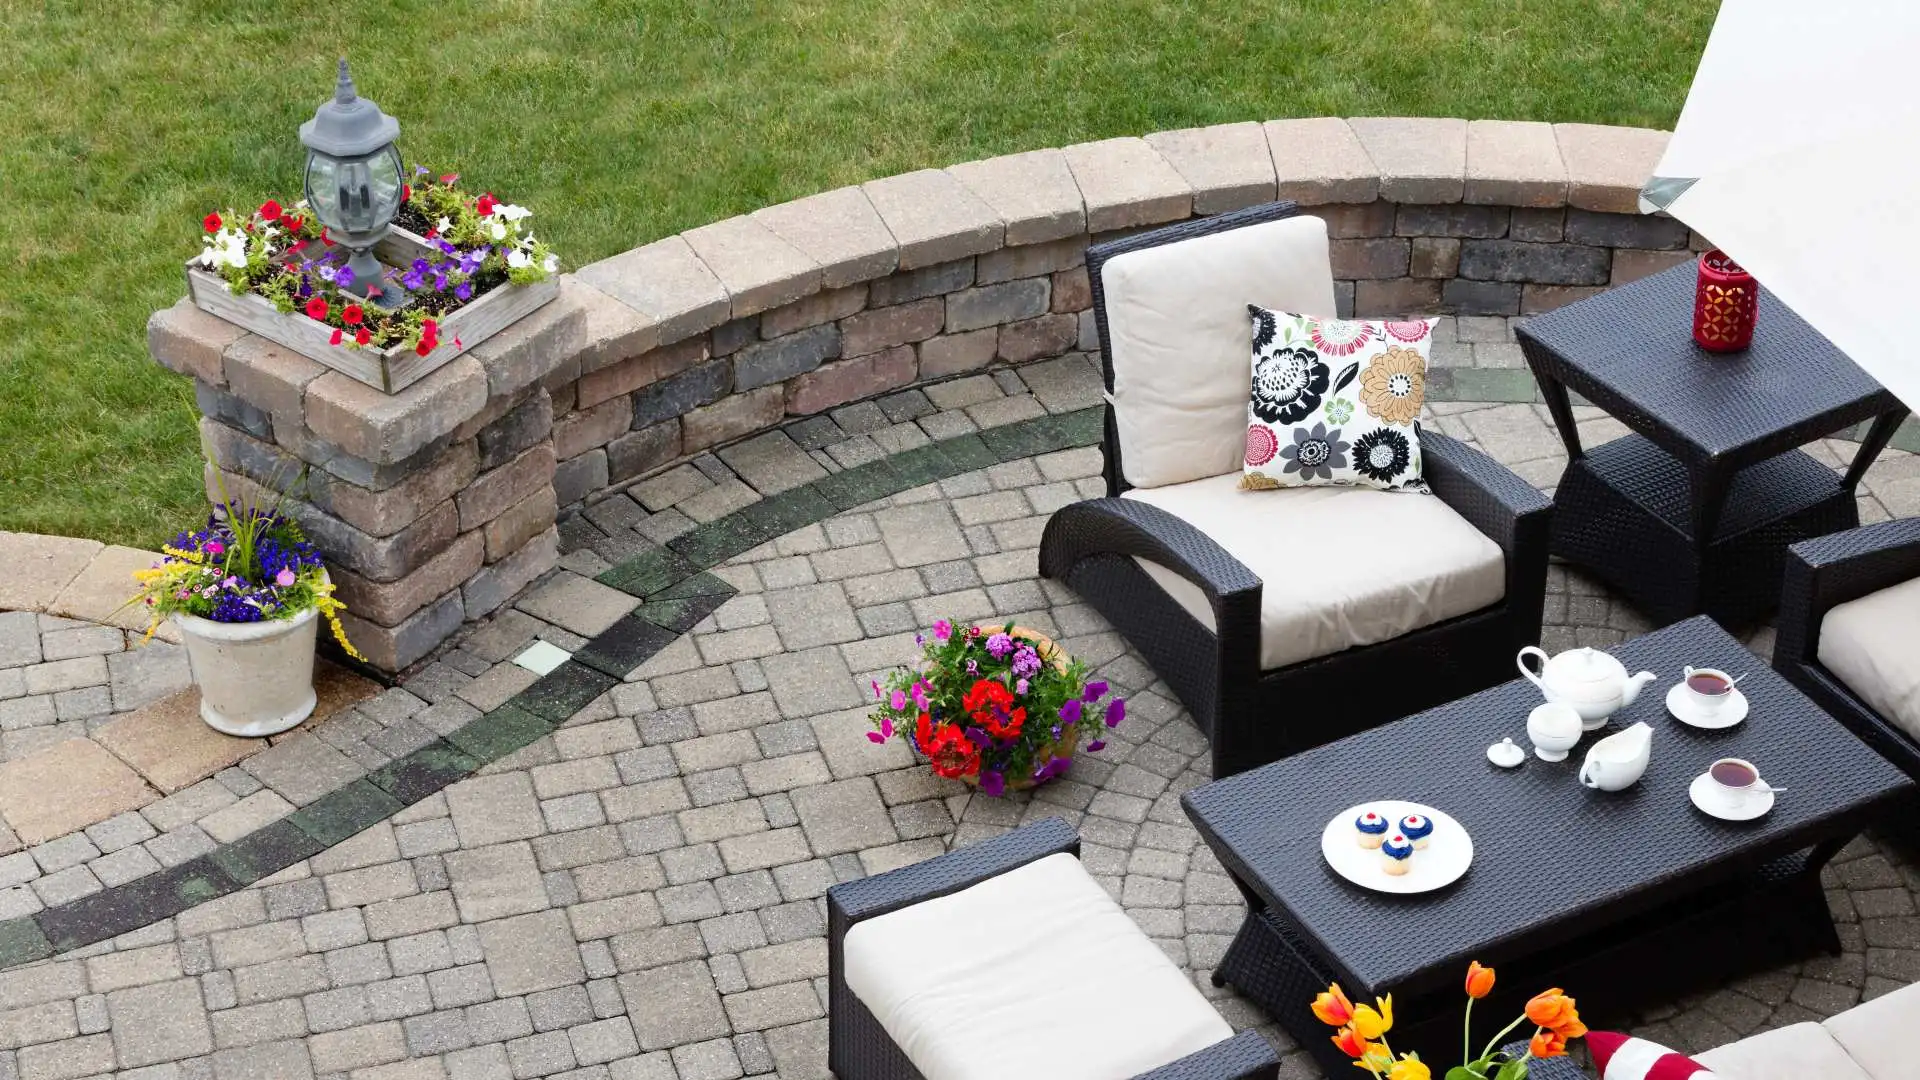 Pair Your Patio With These 3 Outstanding Features!